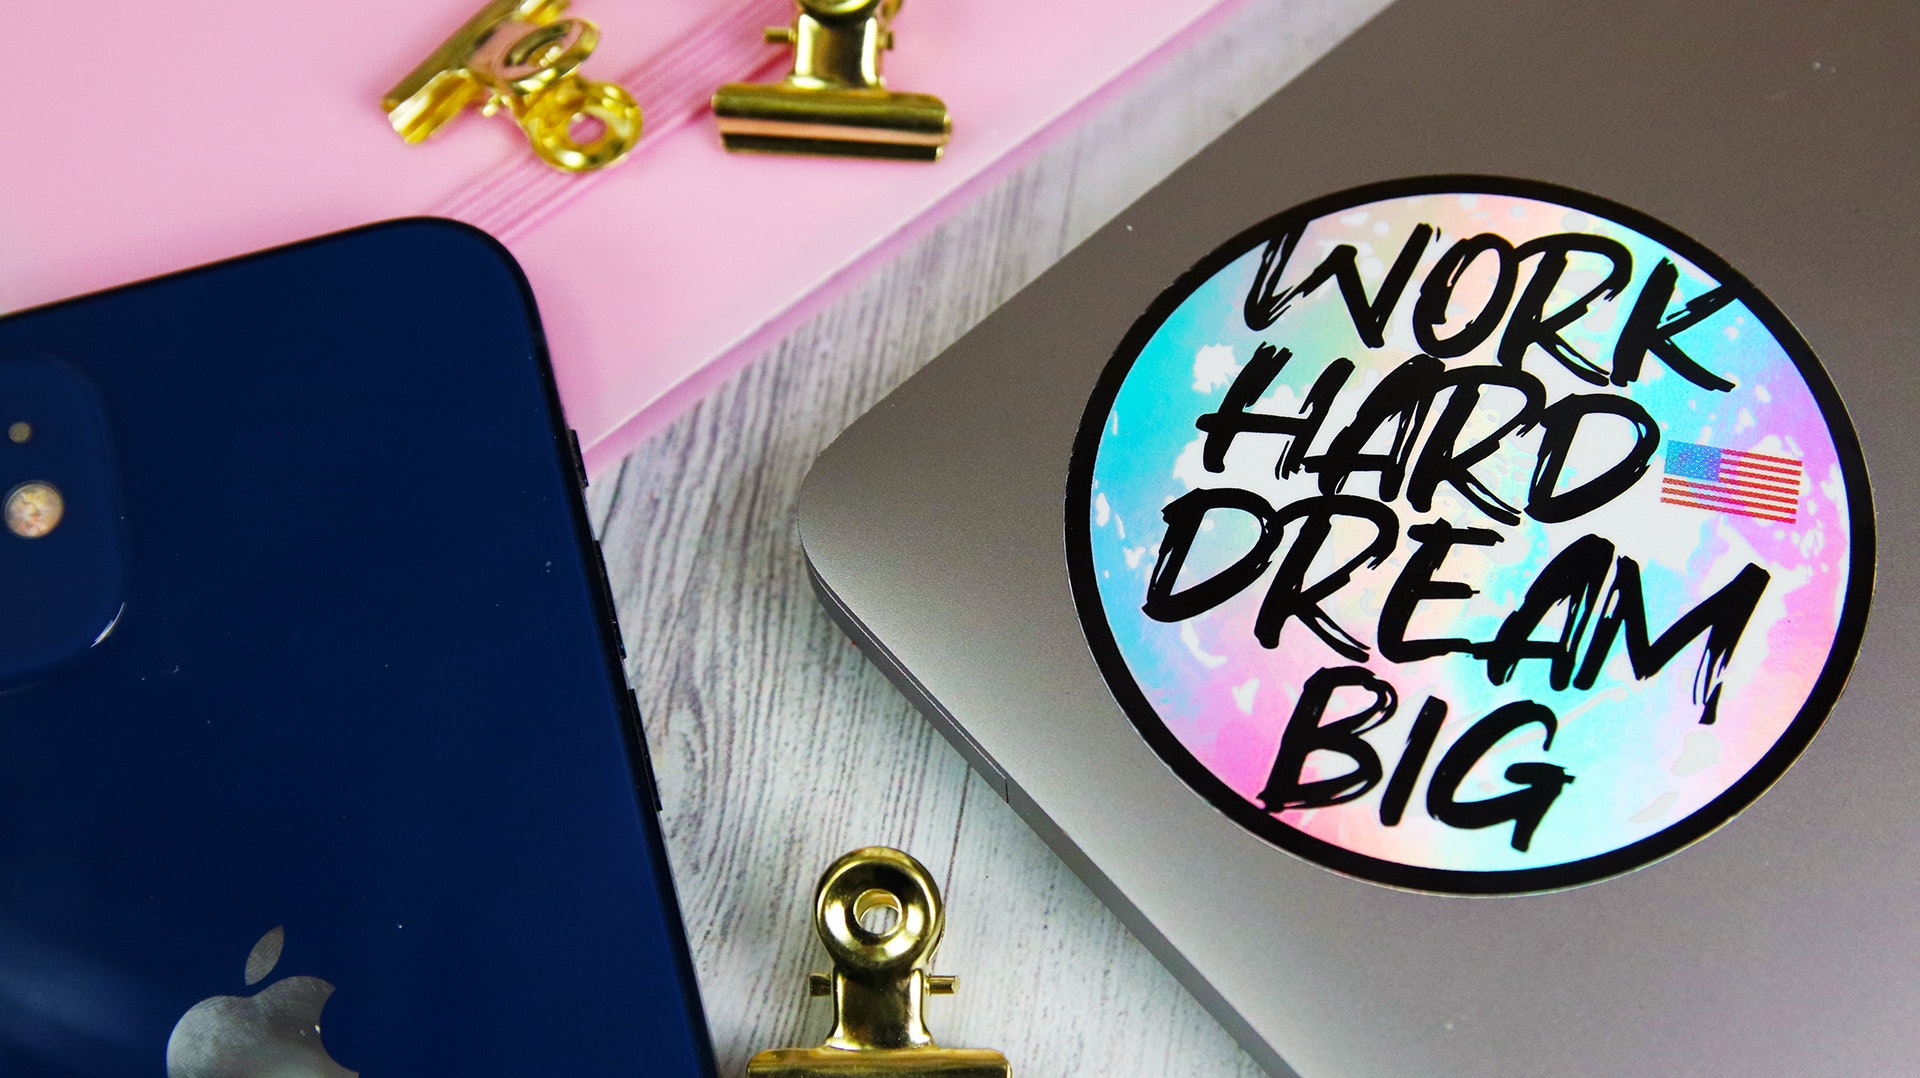 Circle holographic sticker with work hard dream big design applied to a silver laptop